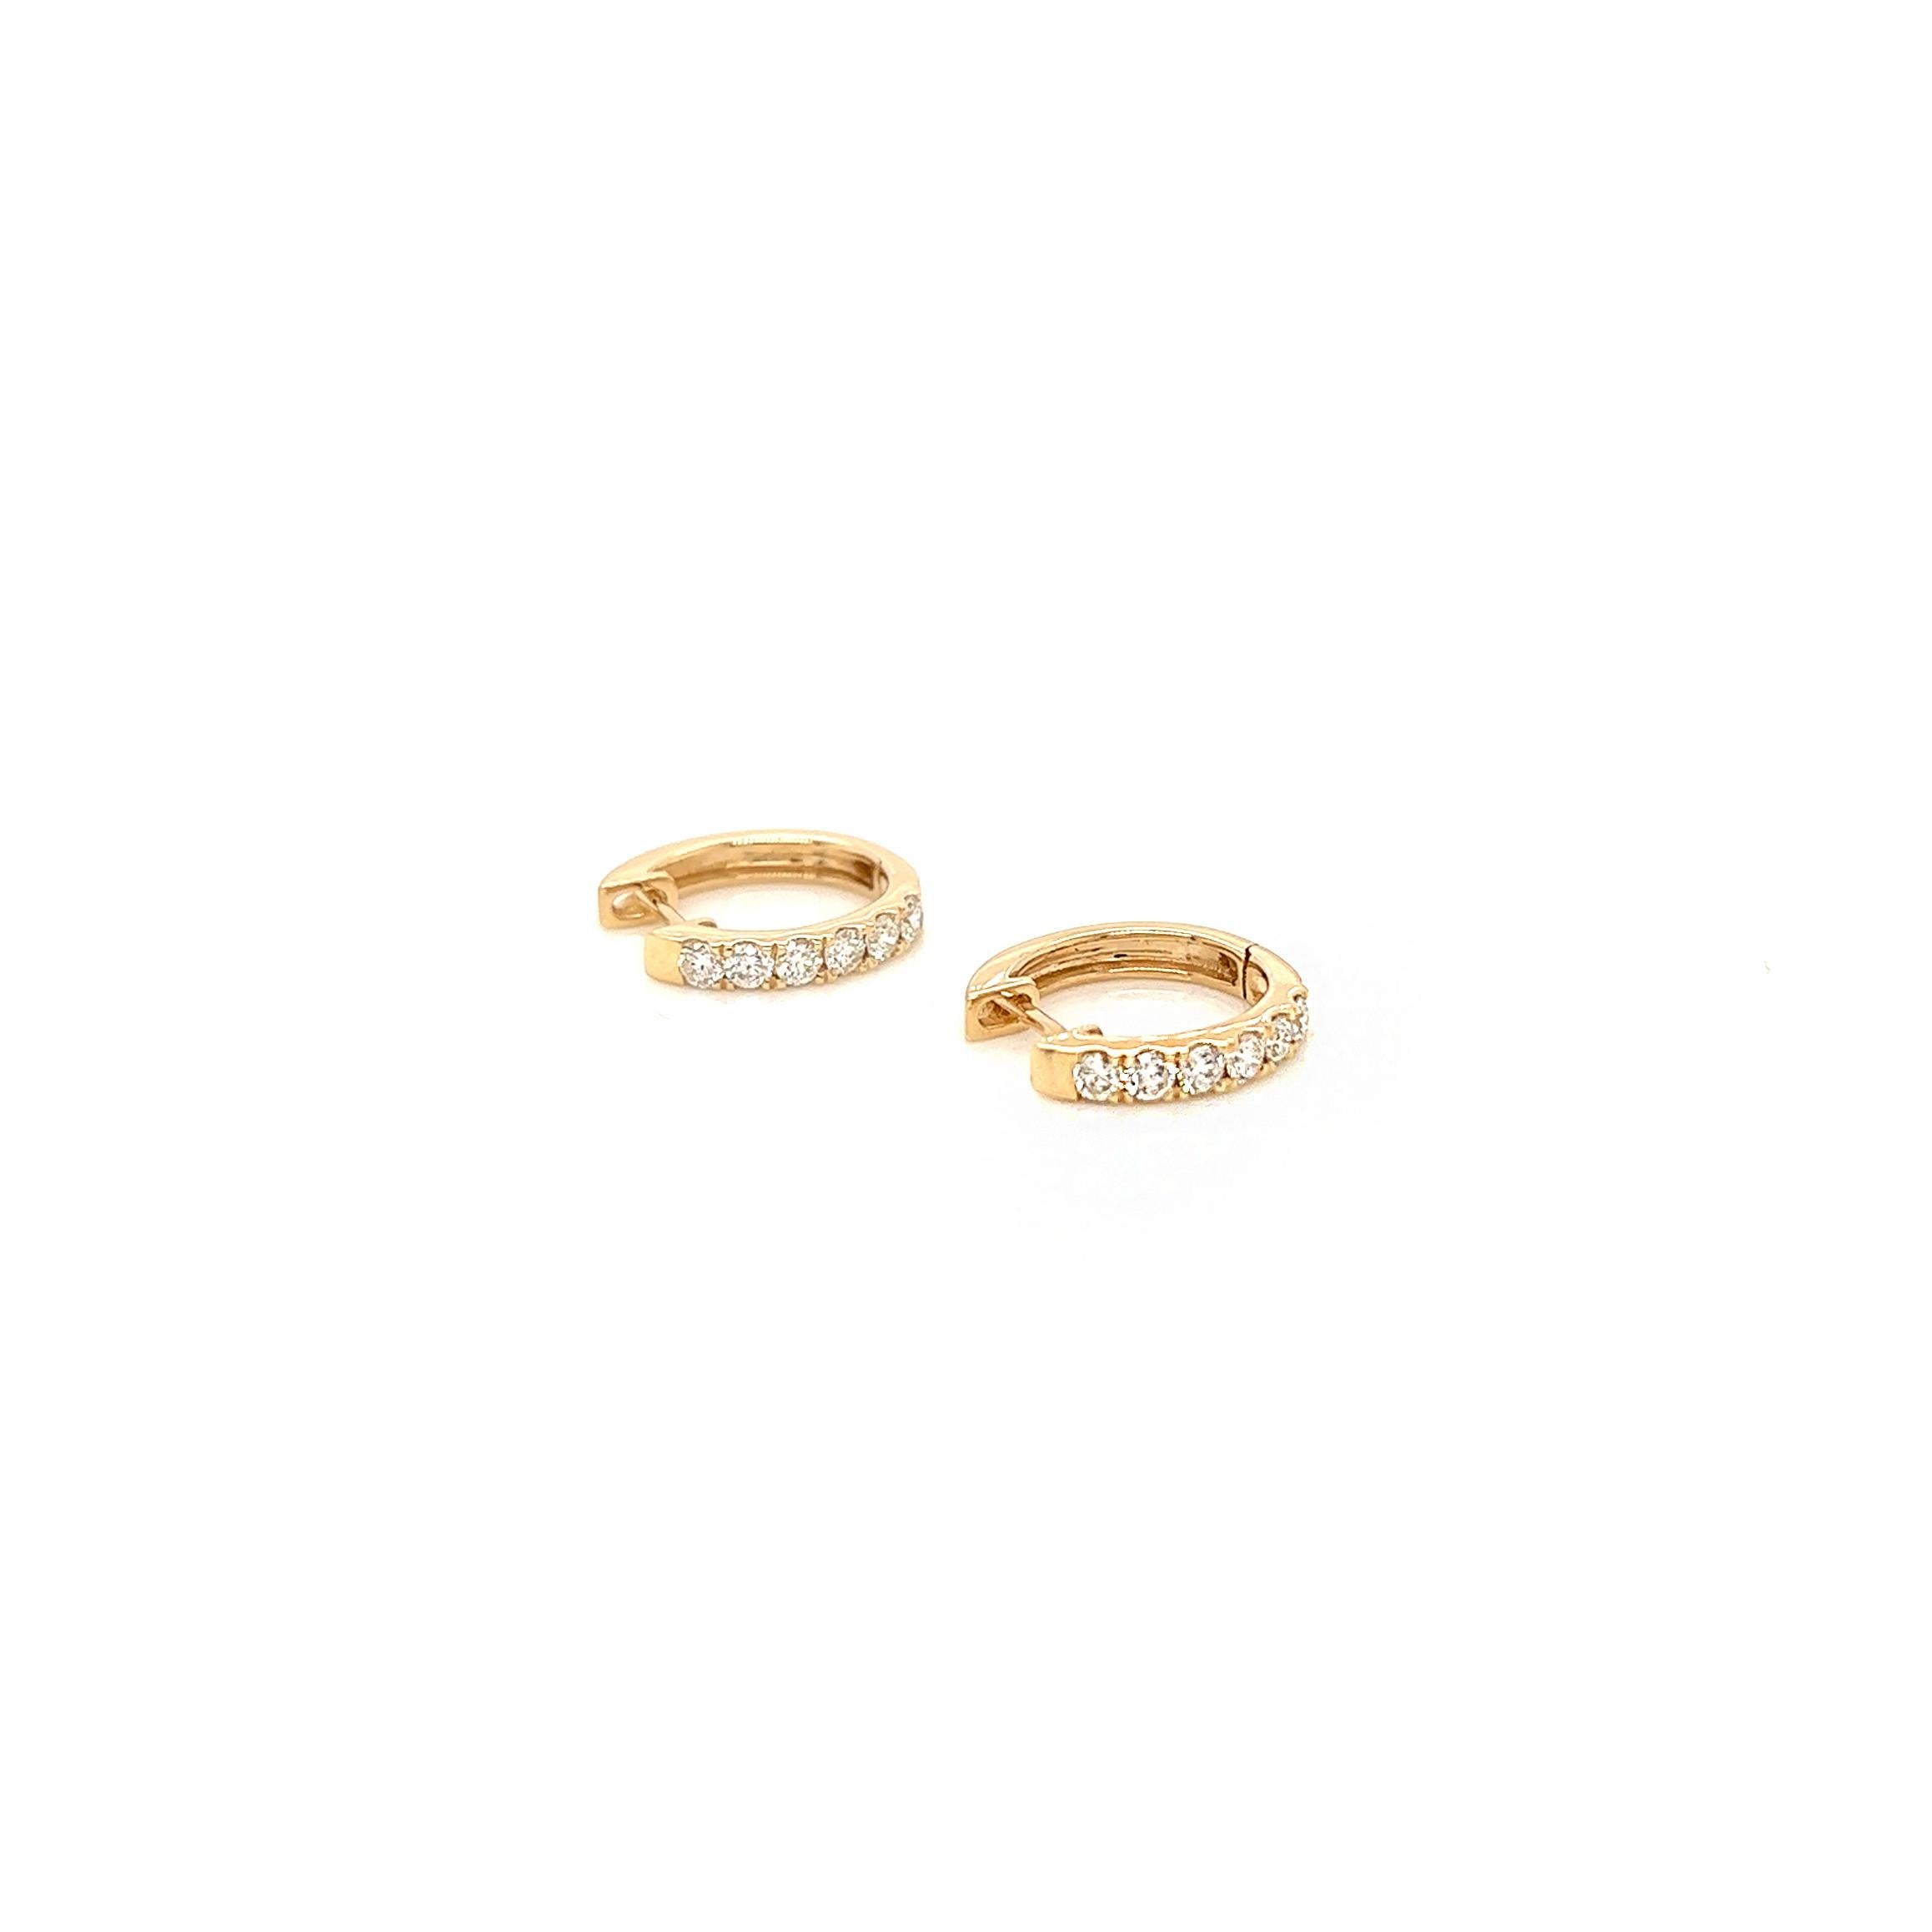 Round Cut 0.42 Carat Diamond Pave-Set Hoop Earrings in 14K Yellow Gold For Sale